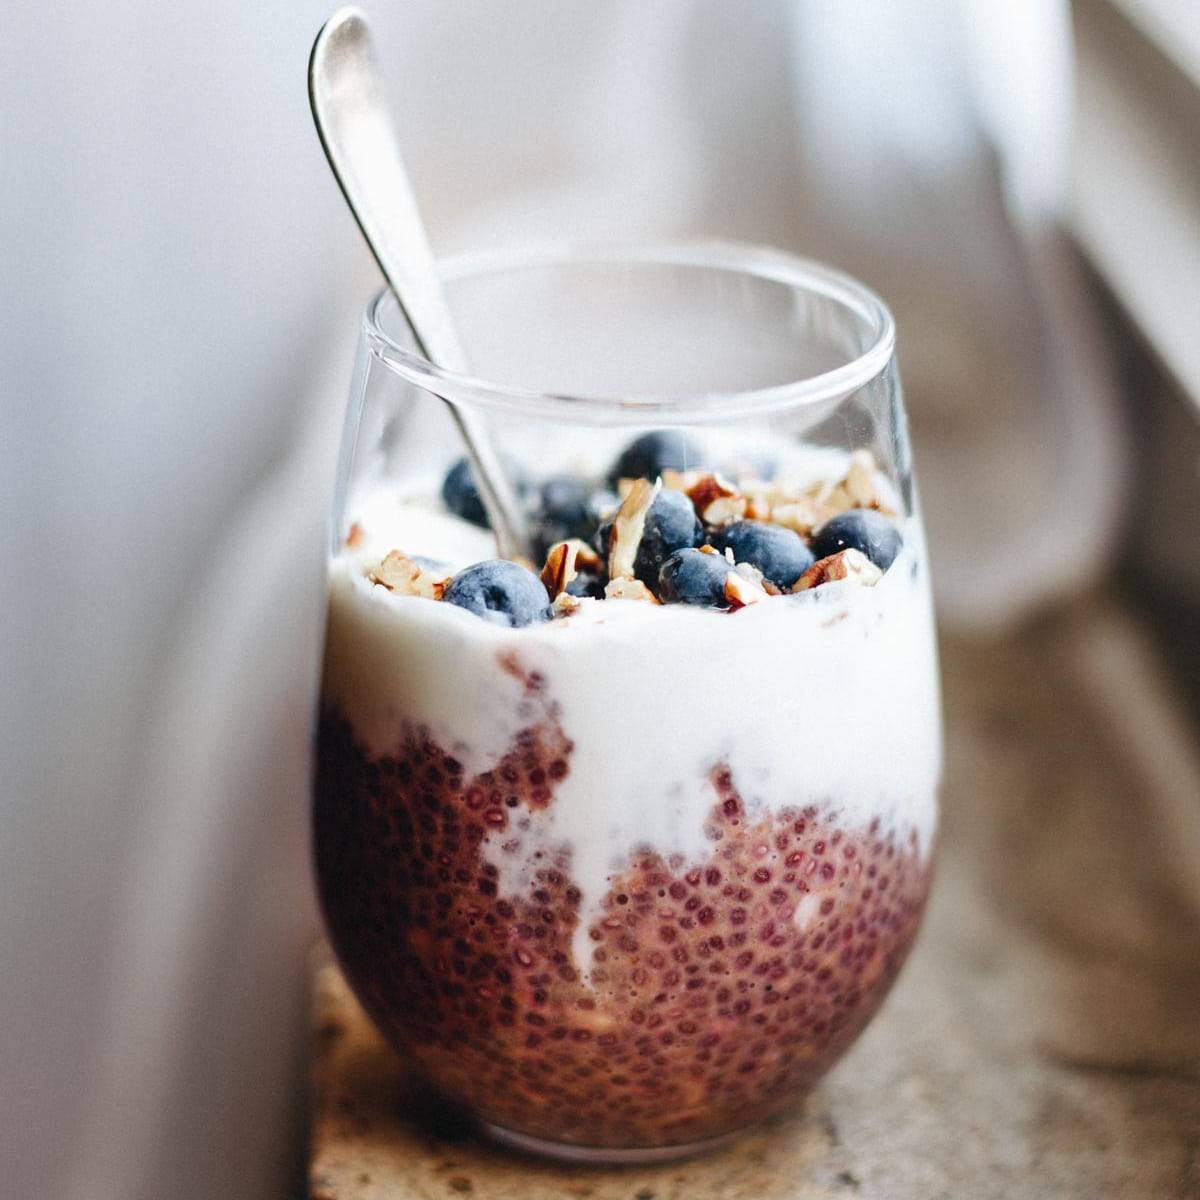 Chia oats with Yogurt and Berries in a glass.